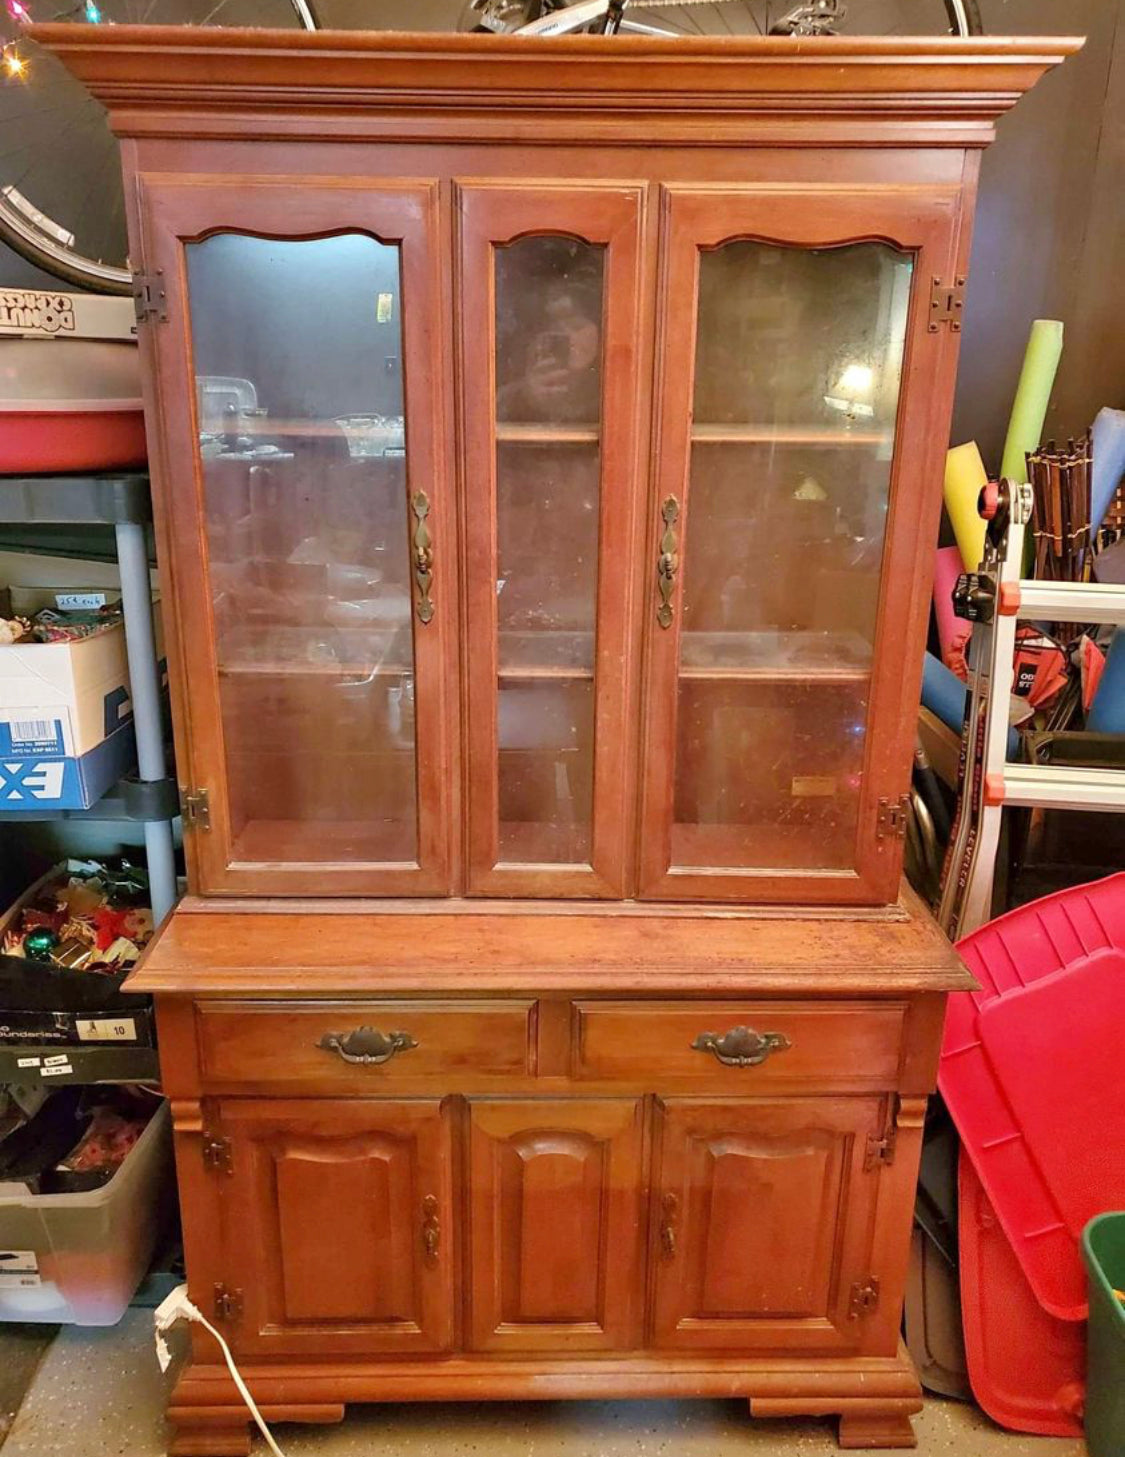 China hutch with glass shelves and overhead light